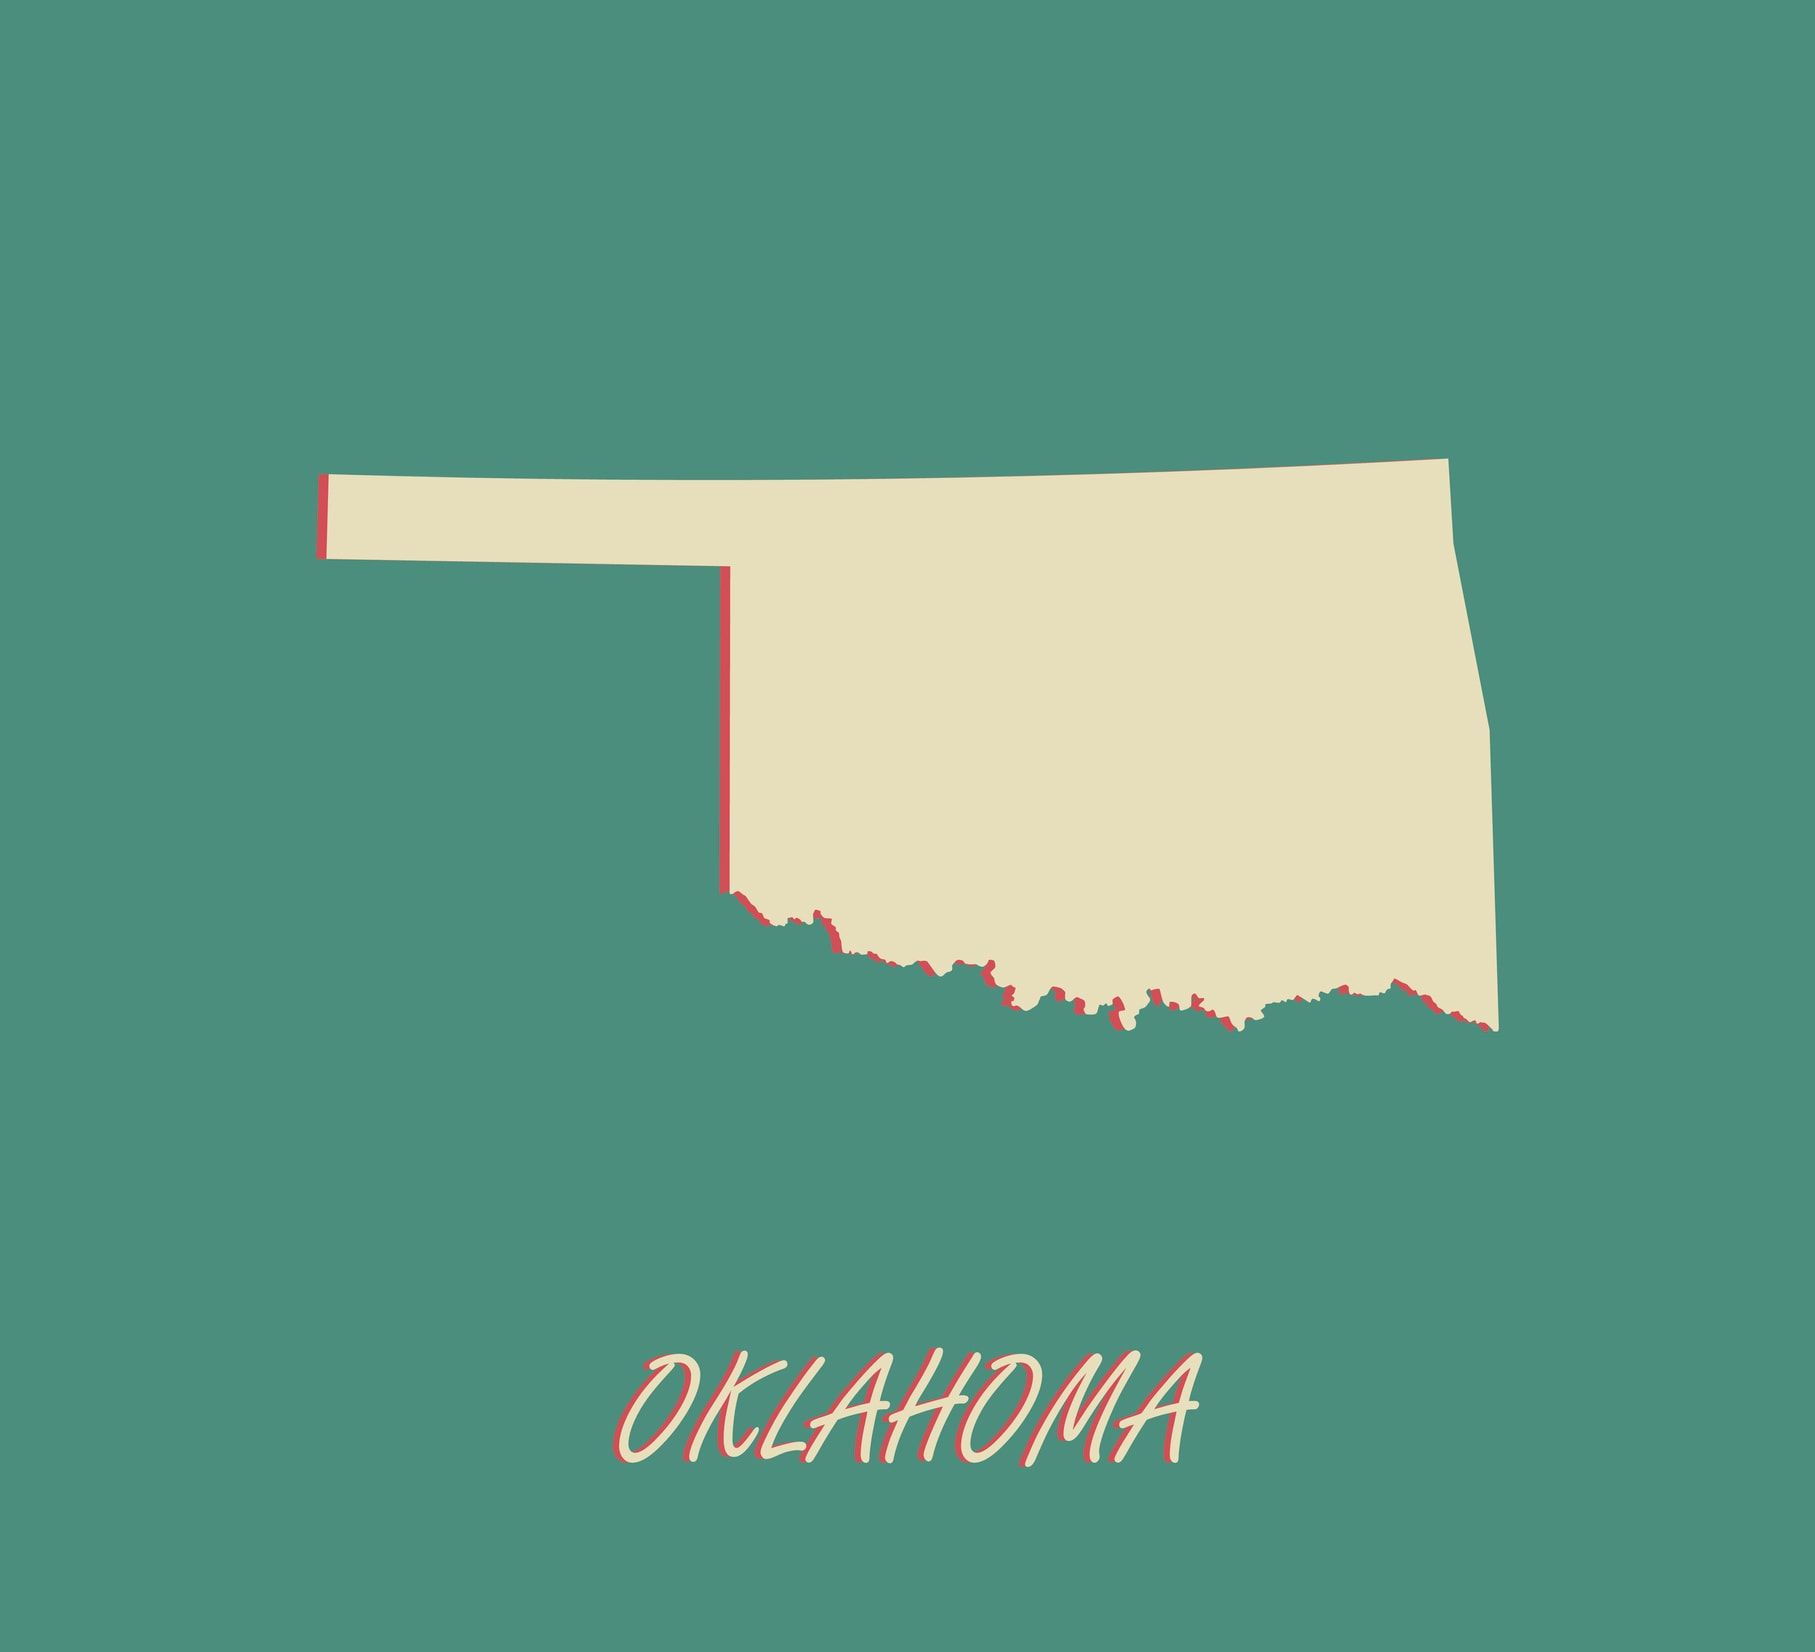 Oklahoma household employment tax and labor law guide